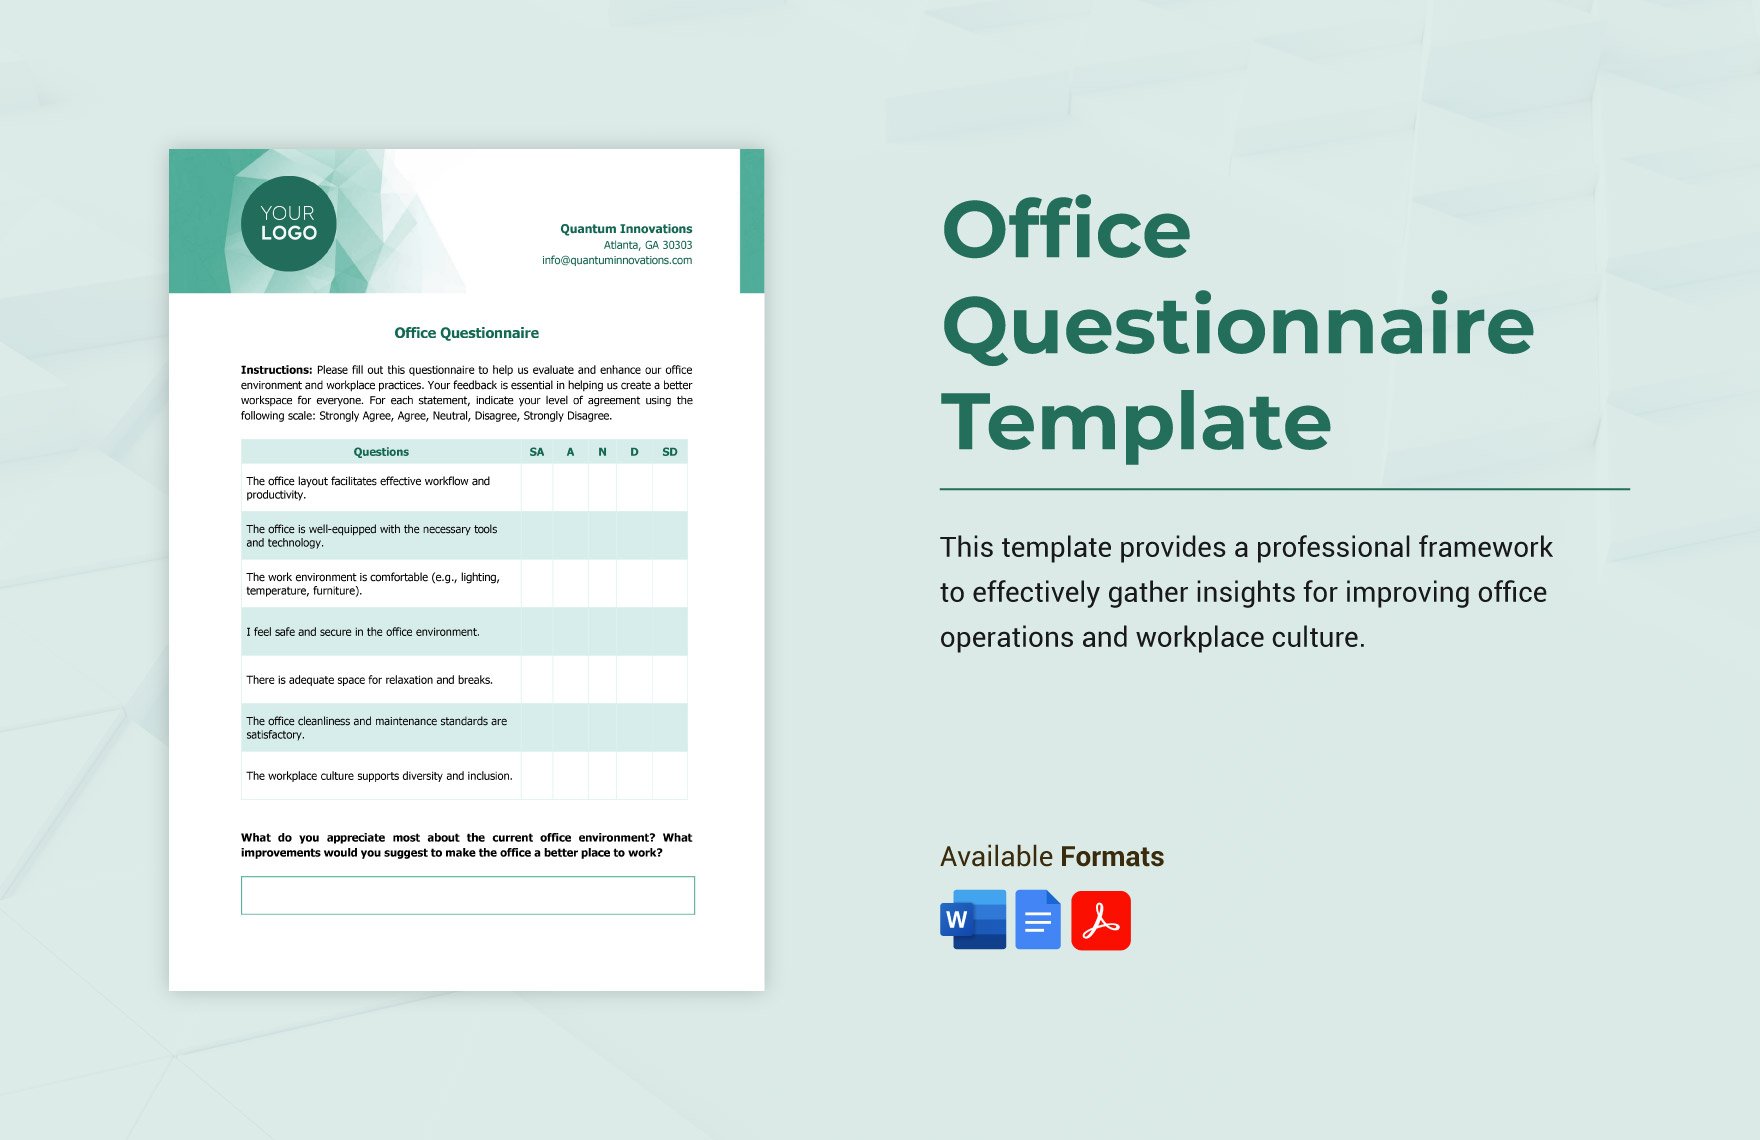 Free Office Questionnaire Template in Word, Google Docs, PDF